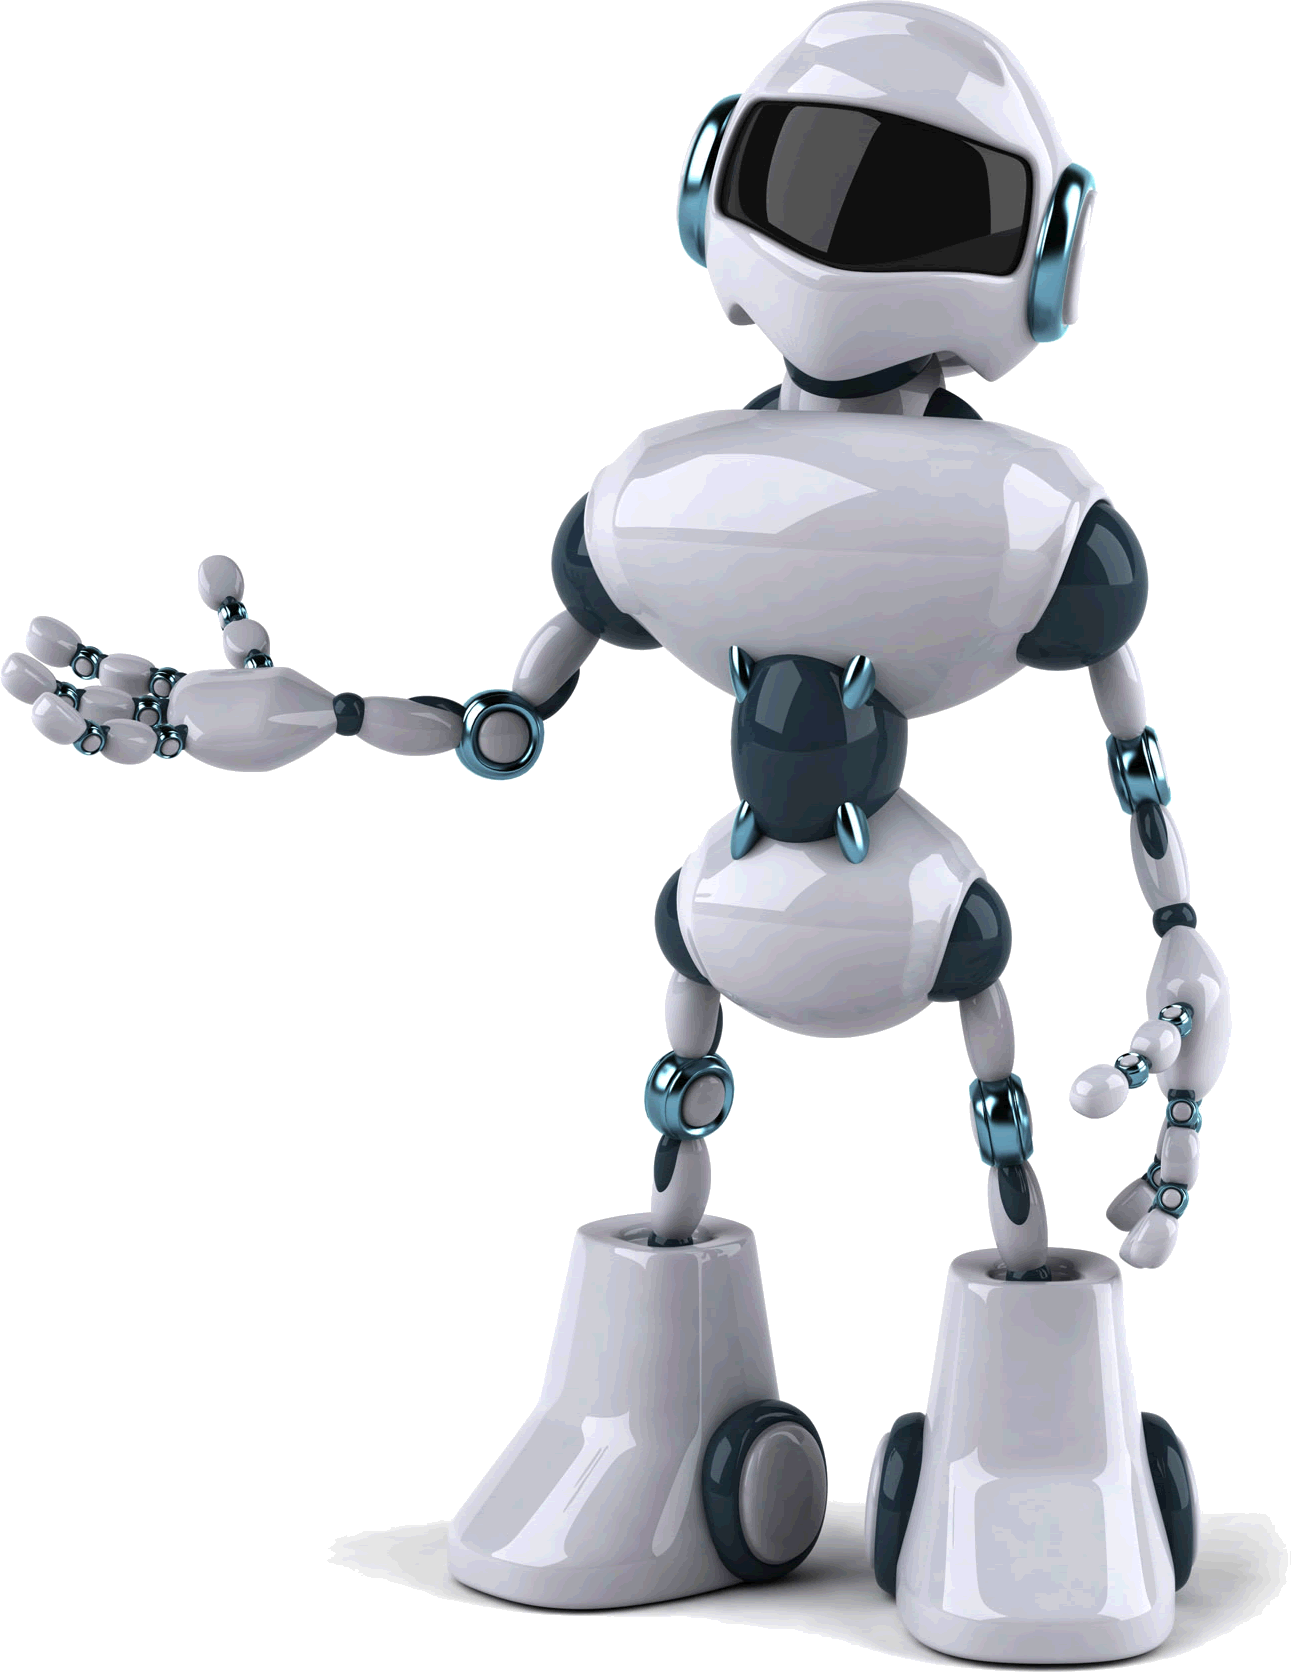 Robotics, Robot, Science, Technology Background Image for Free Download